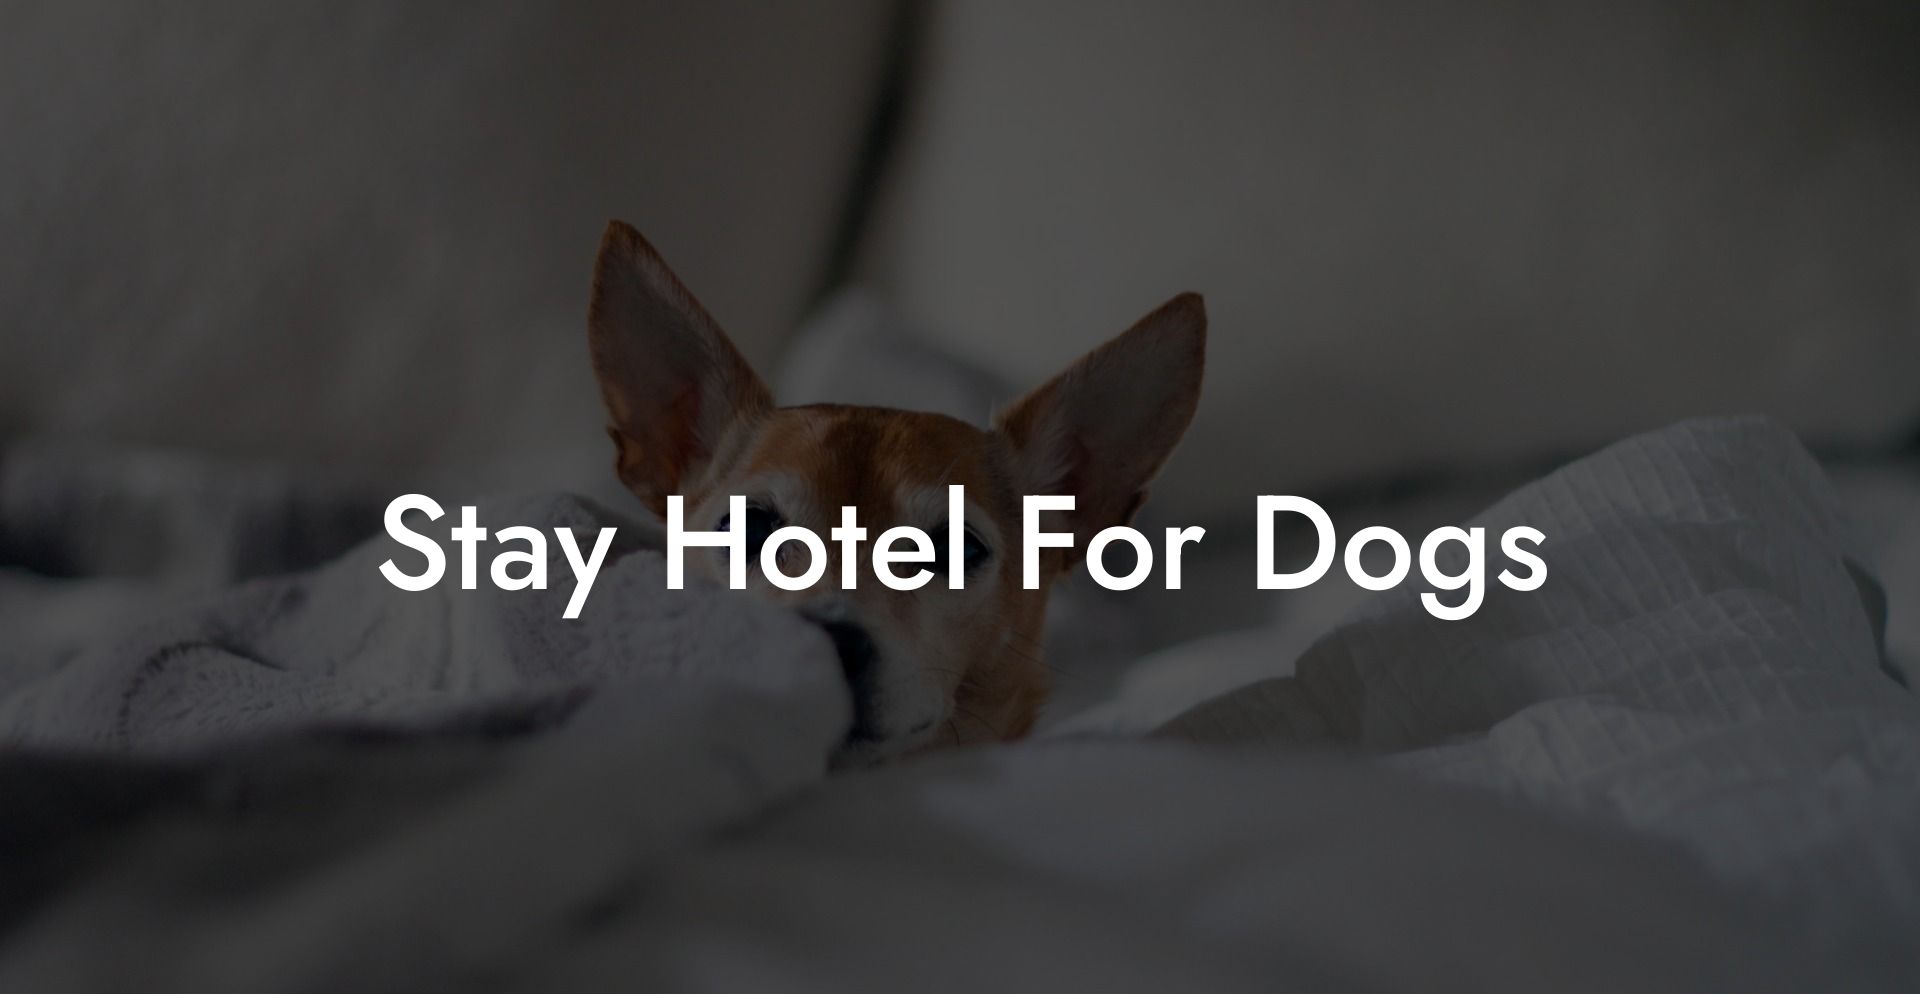 Stay Hotel For Dogs